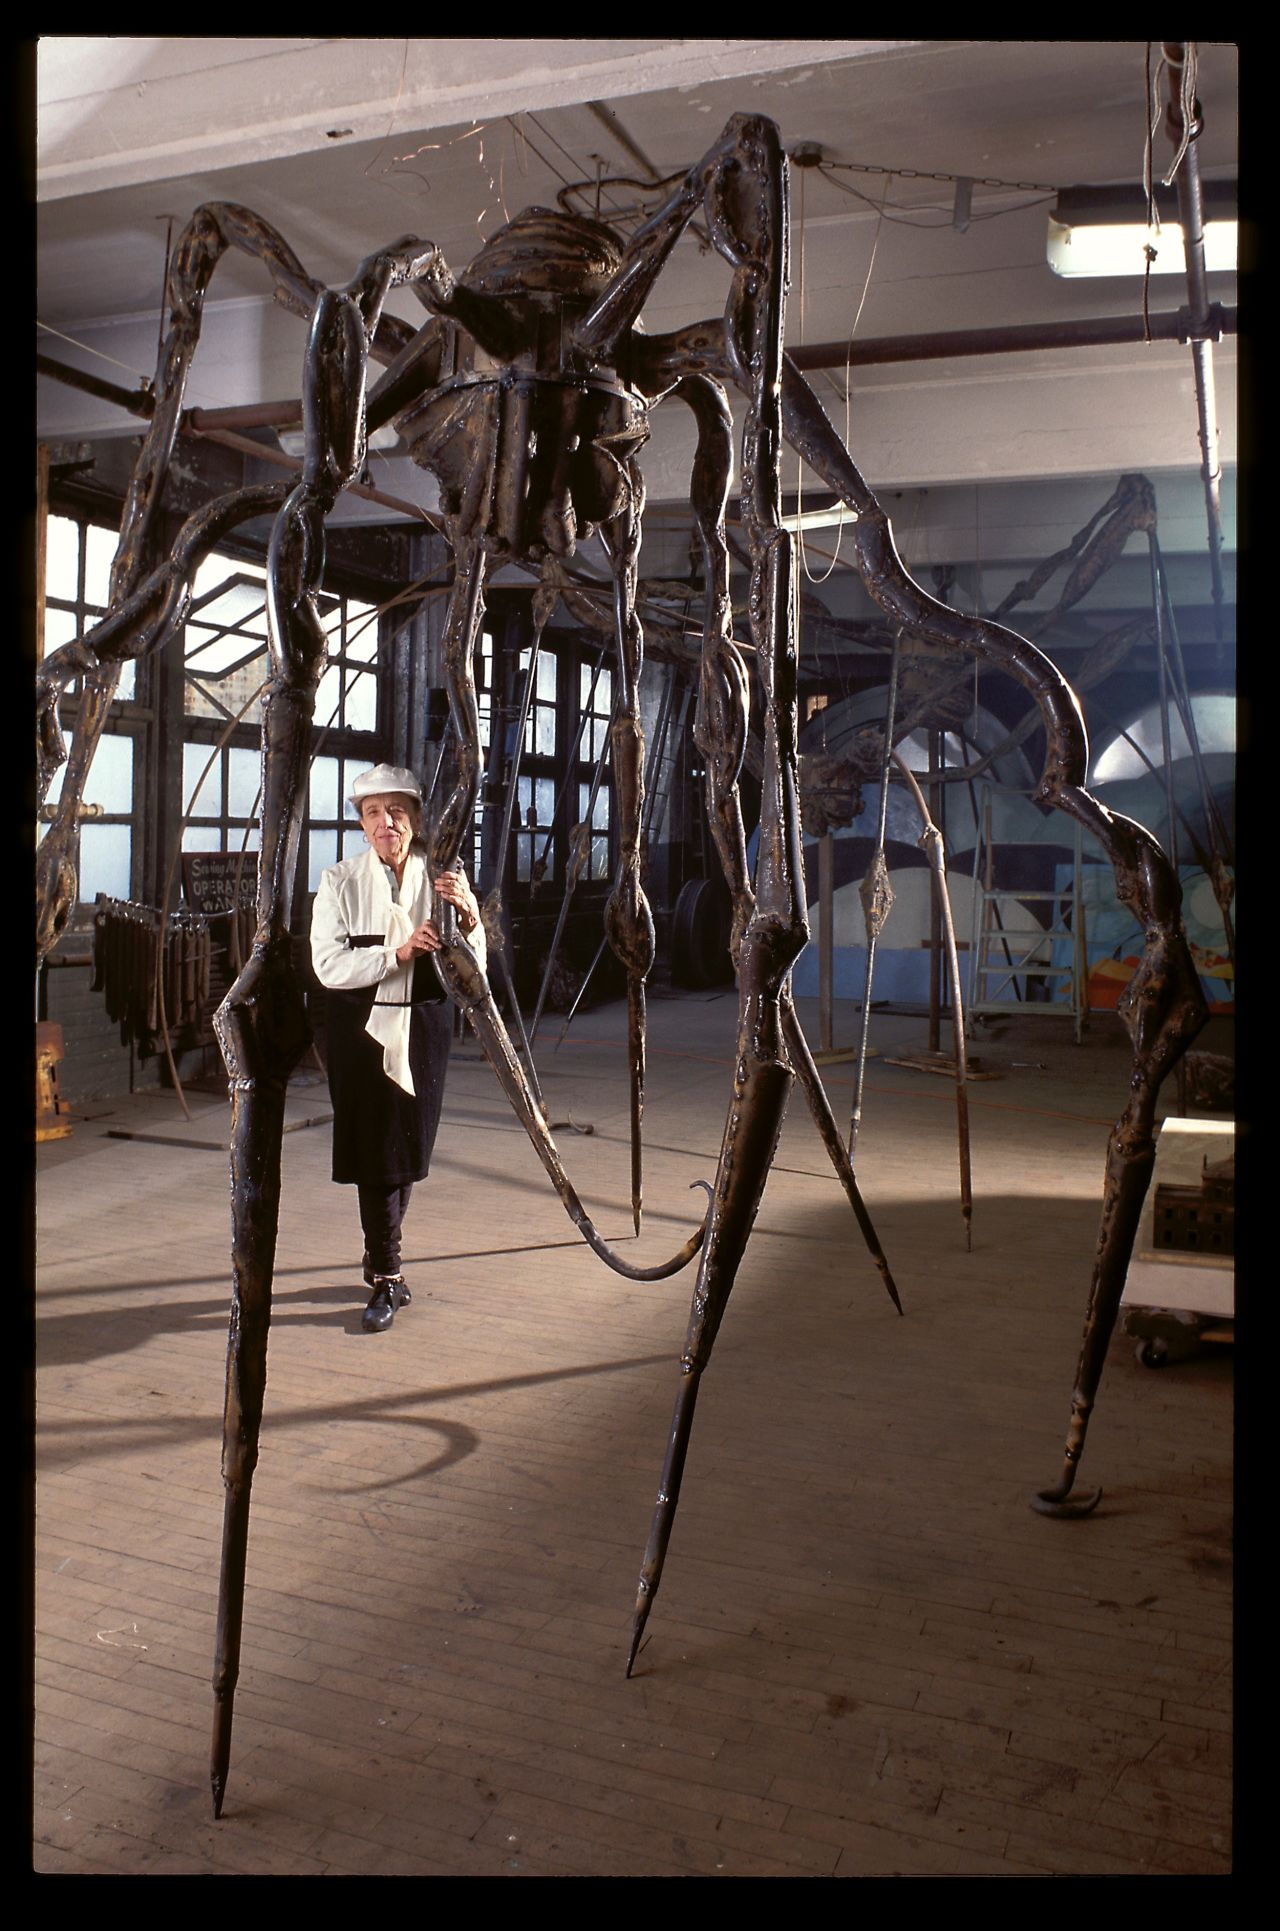 Louise Bourgeois in her Brooklyn studio with her sculpture "SPIDER" in 1995.